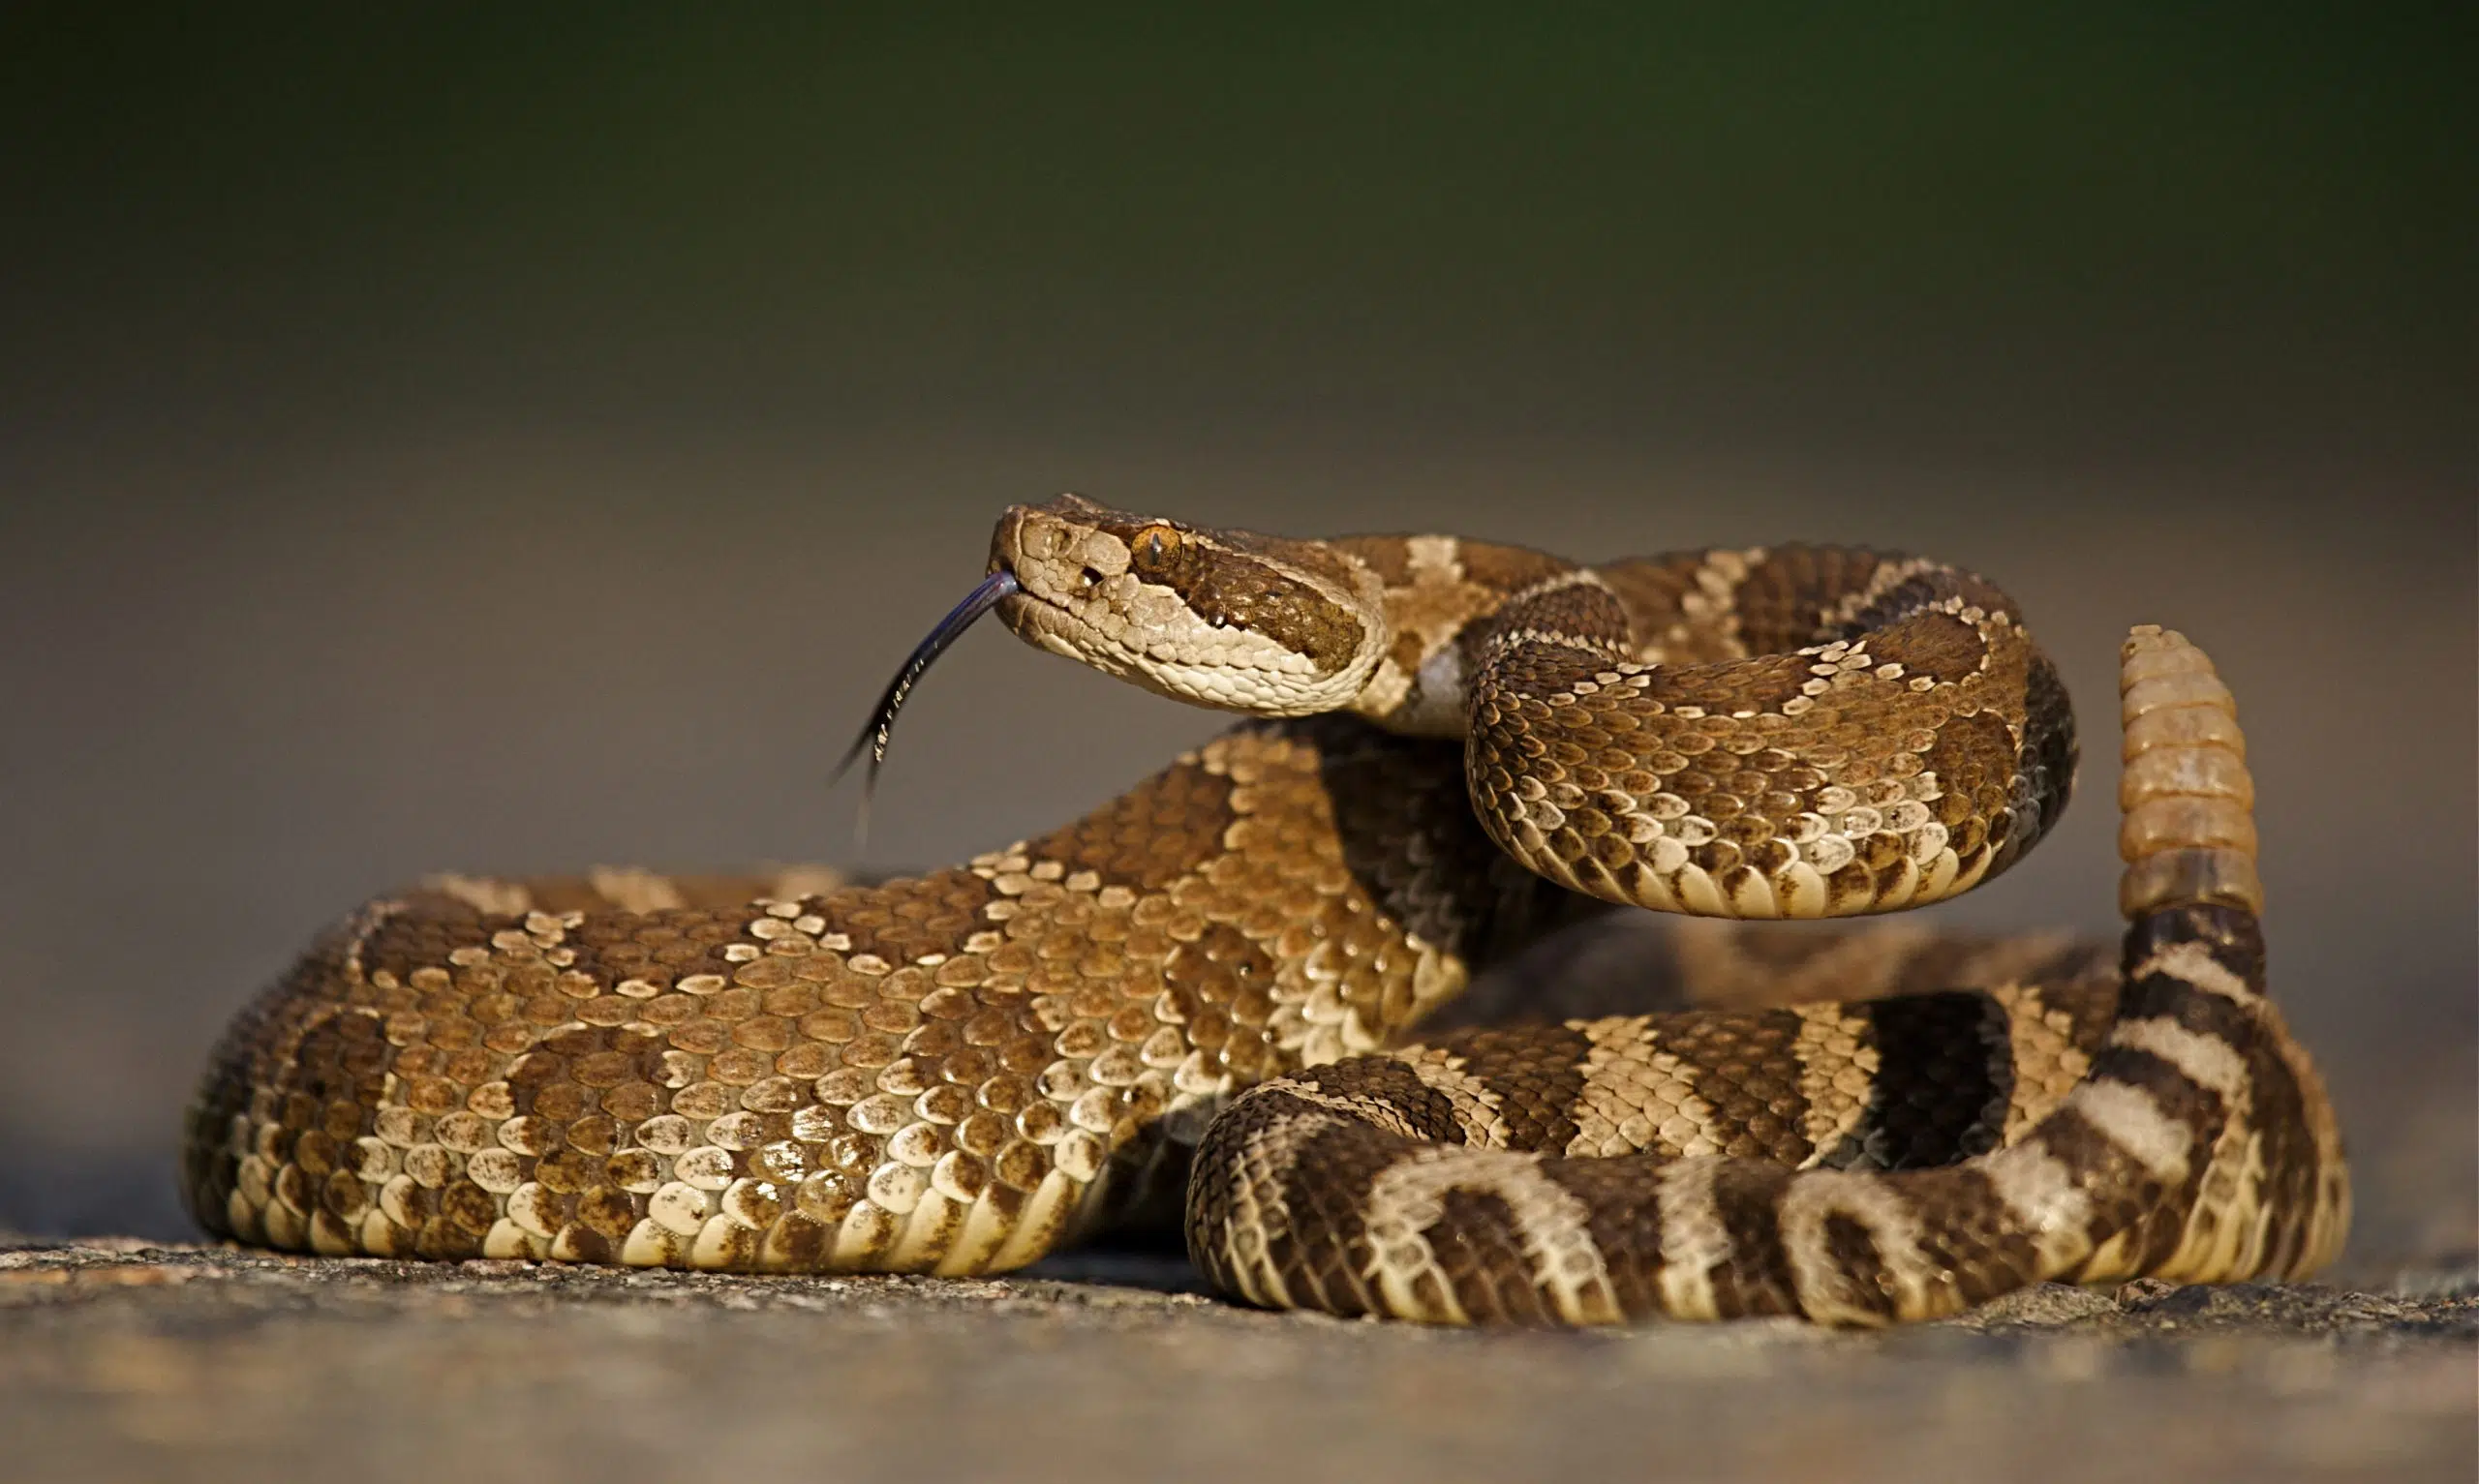 Rattlesnake numbers appear to be declining in the interior 